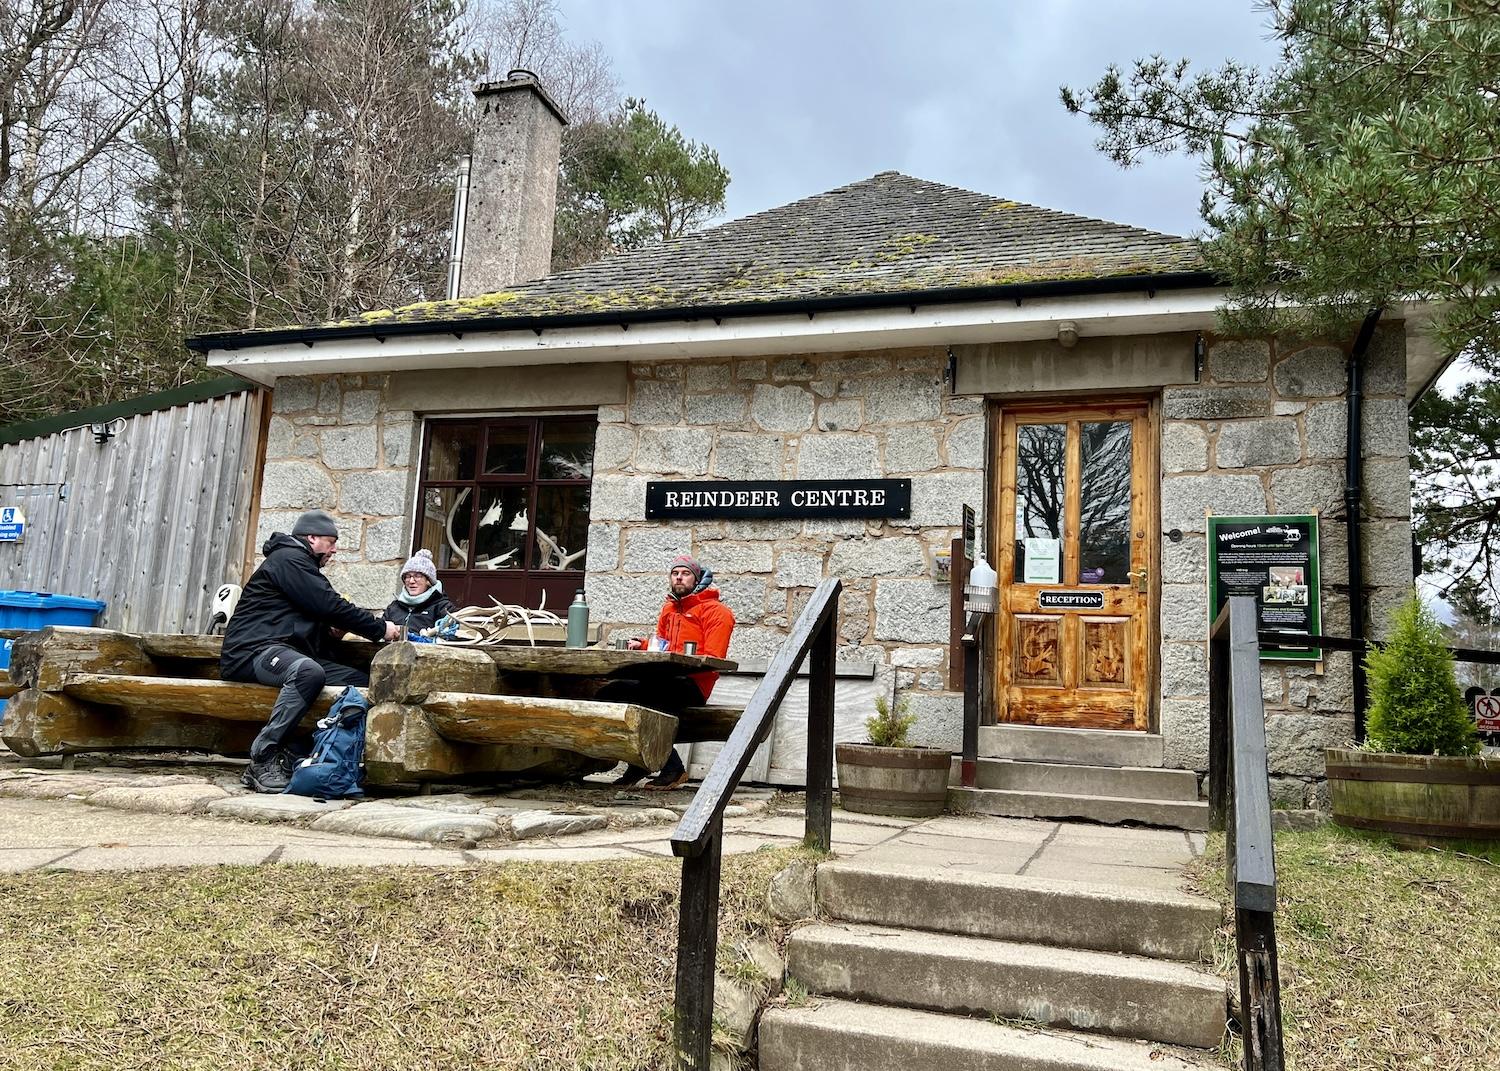 Wilderness Scotland guide Joe Mann, right, leads a picnic at the Reindeer Centre in Glenmore.